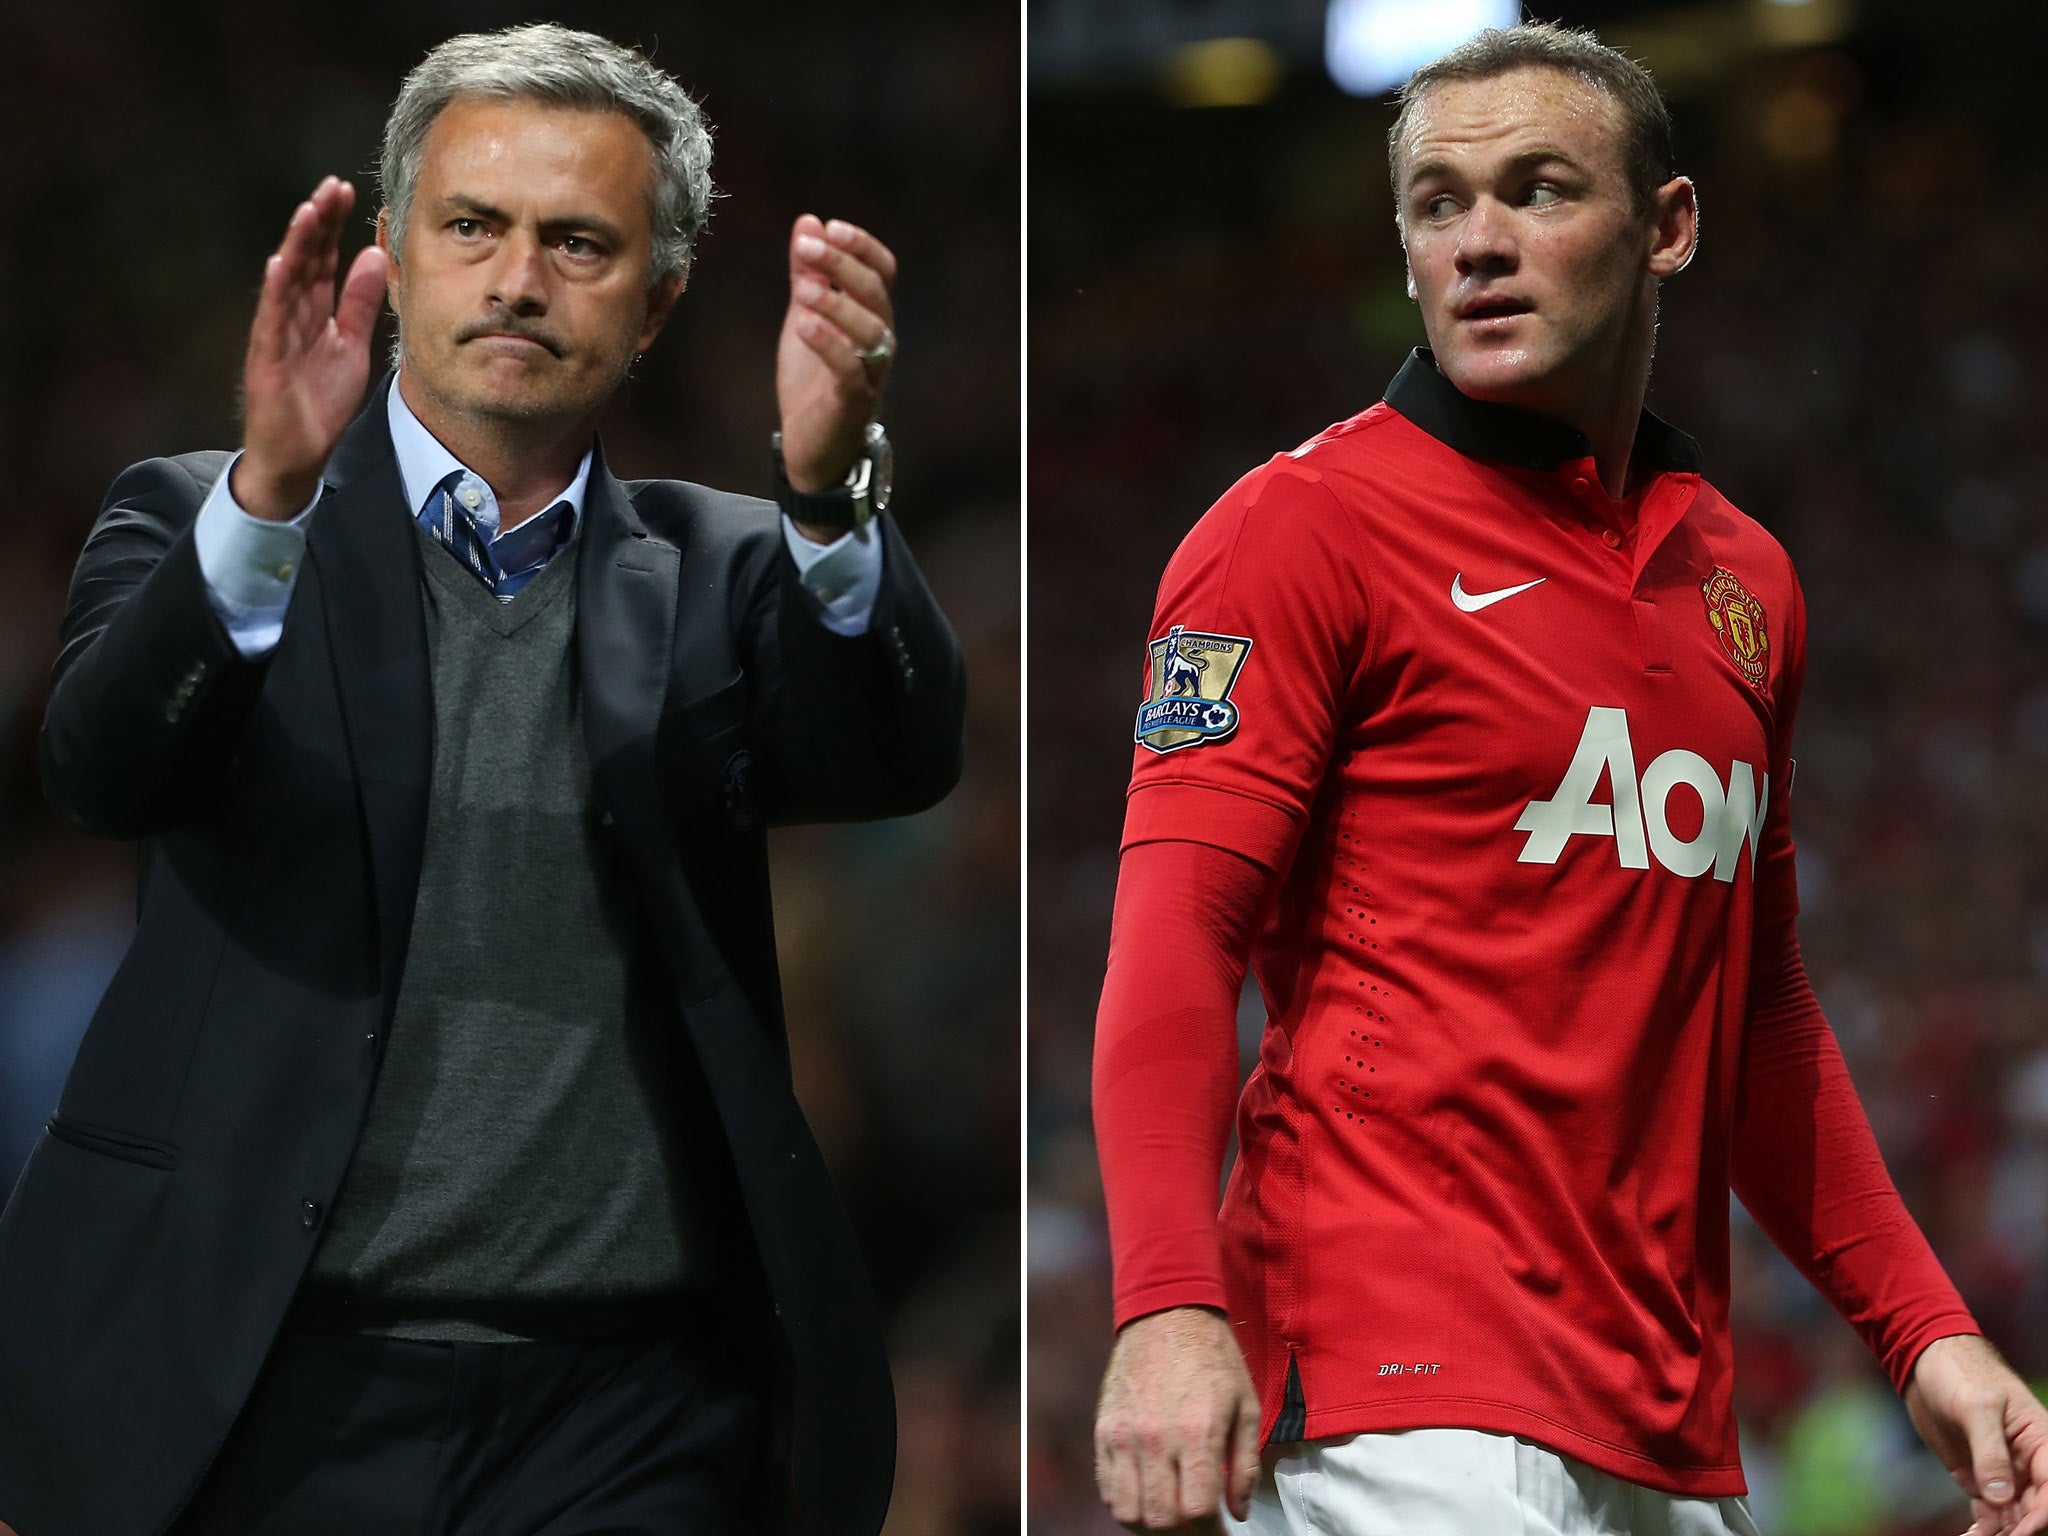 The Mourinho and Rooney saga may never end